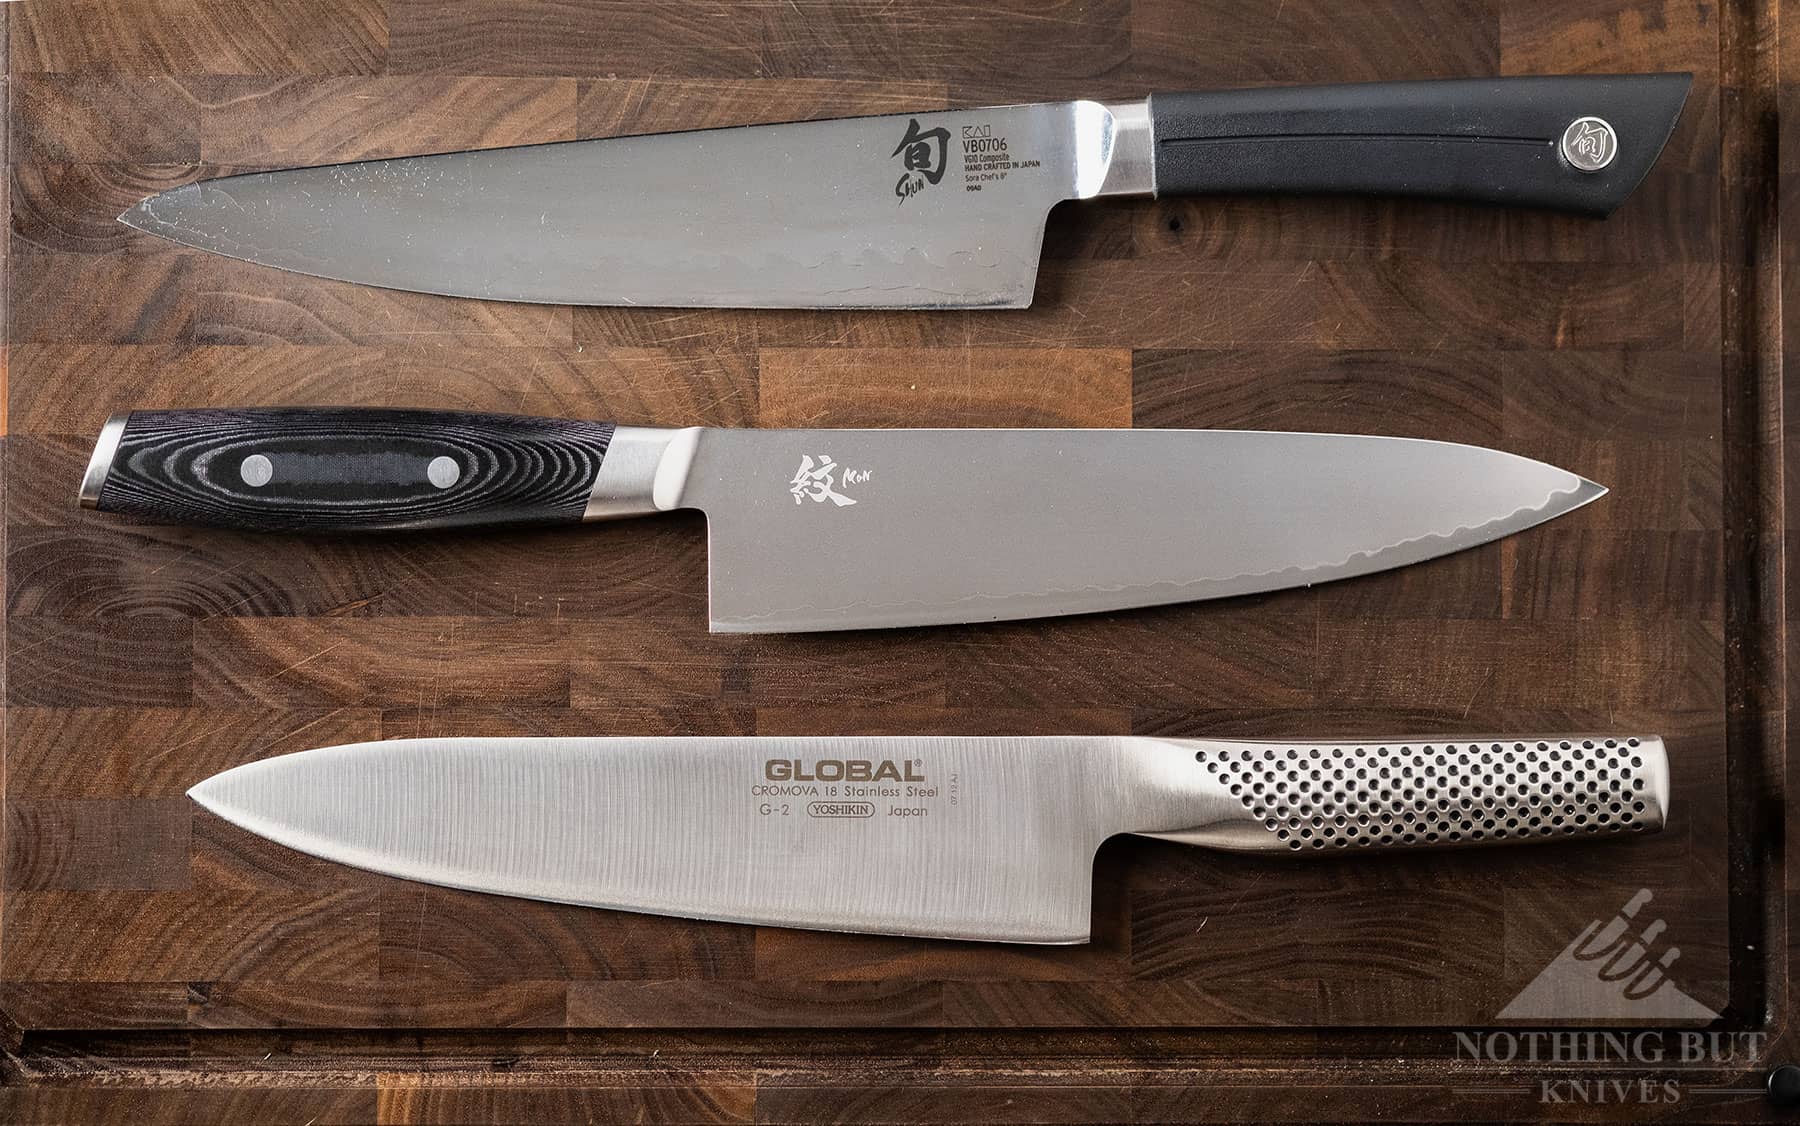 The Yaxel Mon and Shun Sora chef knives are two competaters of the Global G-2 chef knife. All three knives are shown in this image.